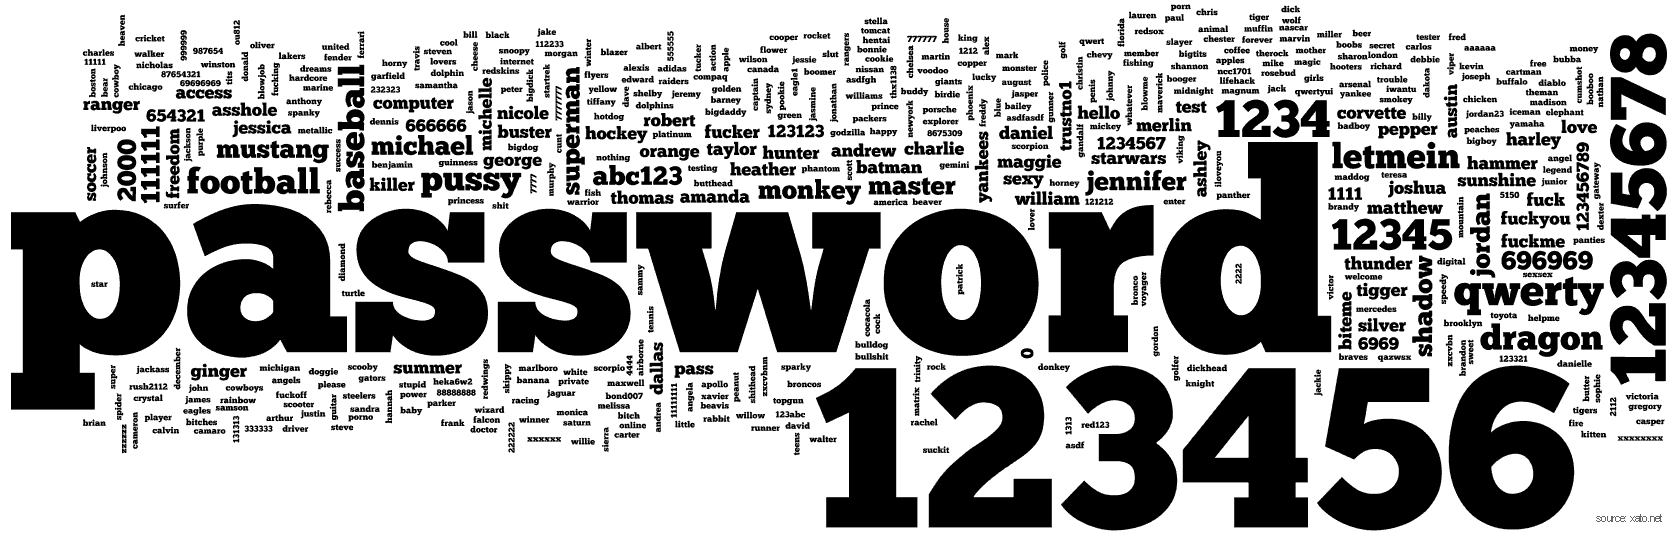 500-most-used-passwords-show-as-a-tag-cloud.gif